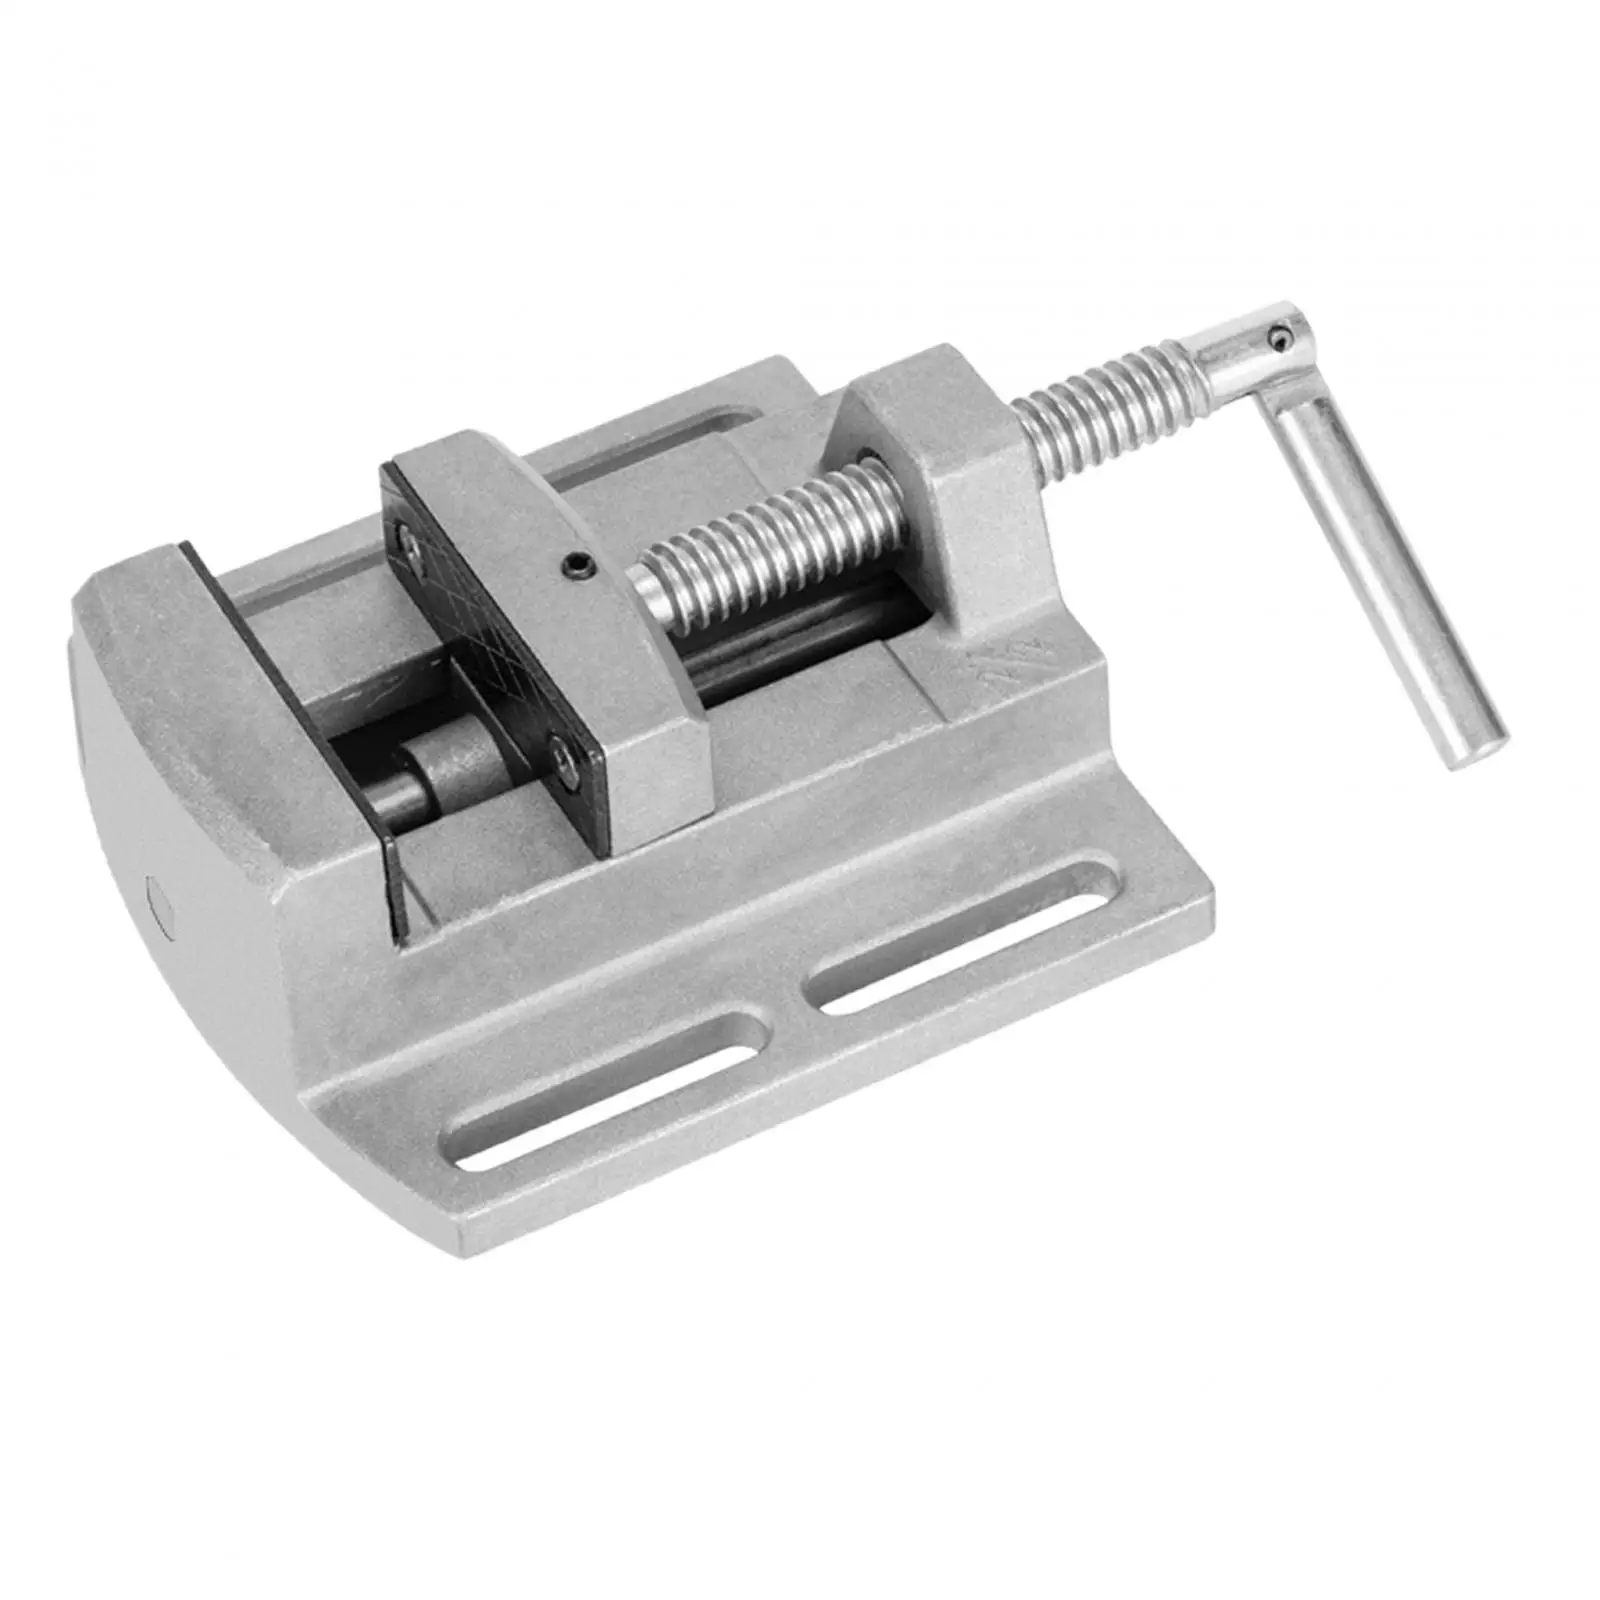 Drill Press Vise Tabletop Clamp Vice Diy Work Portable Mini Parallel Jaw Vice